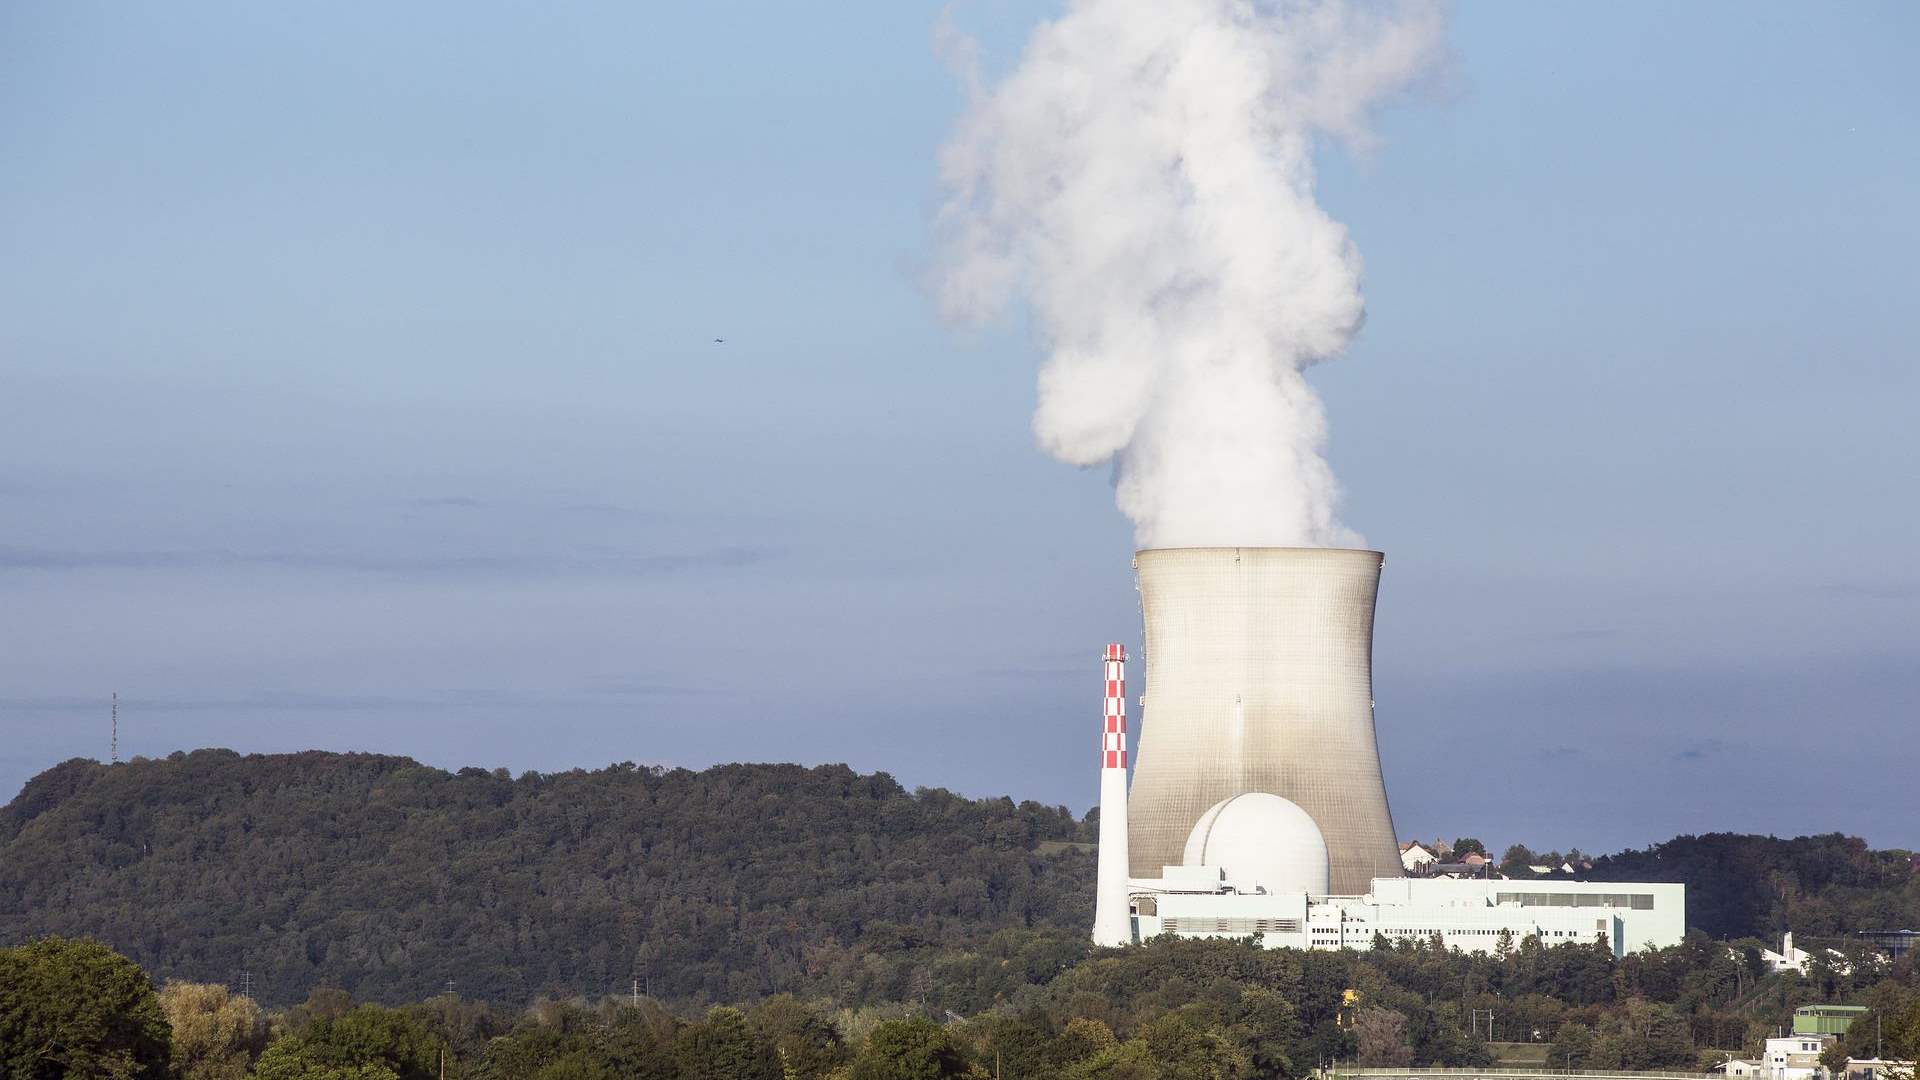 Over 20 nations call for tripling of nuclear energy